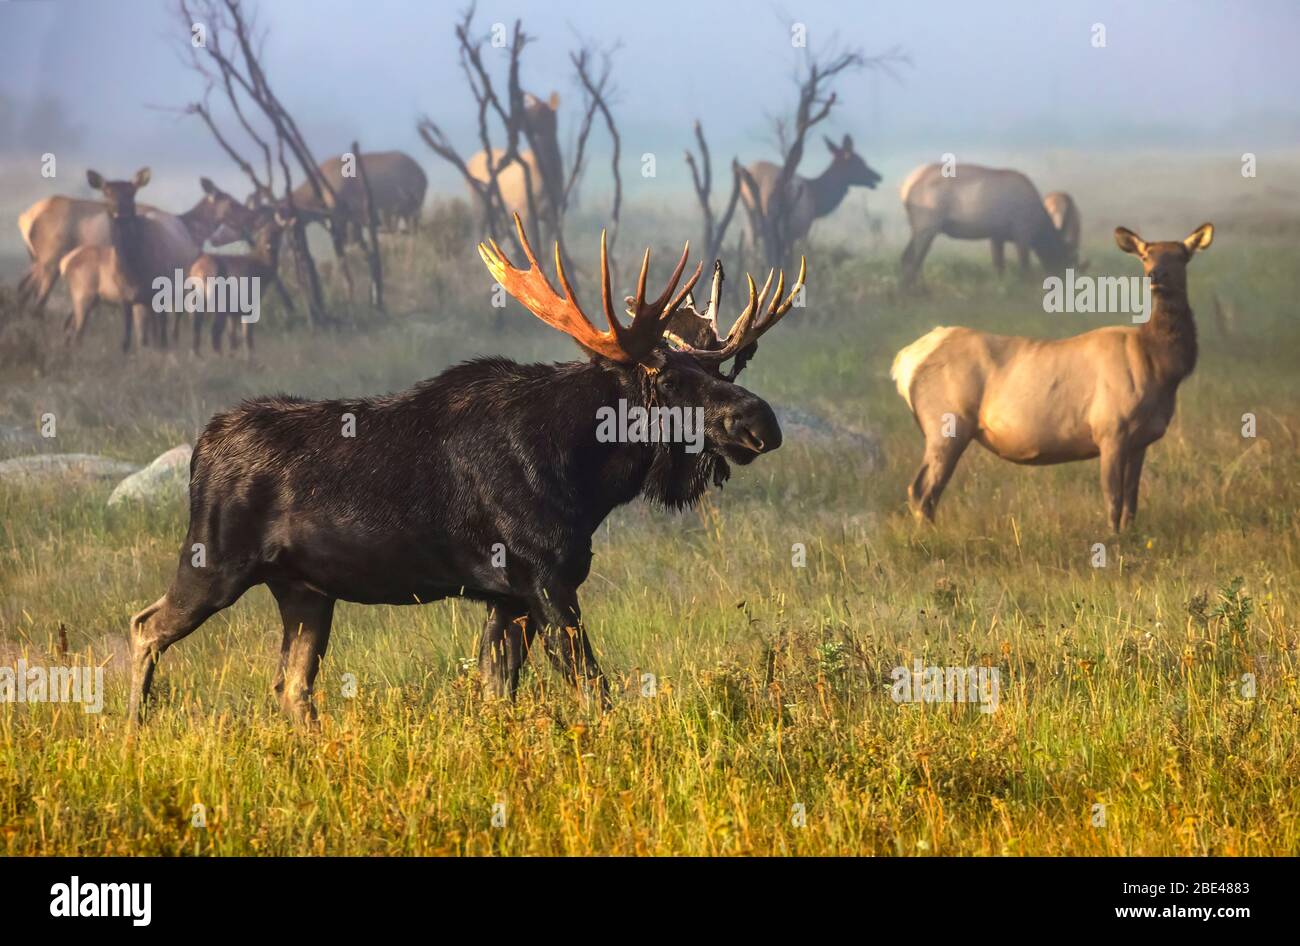 Moose bull (Alces alces) and Elk cow (Cervus canadensis) standing with a herd in a foggy field; Fort Collins, Colorado, United States of America Stock Photo